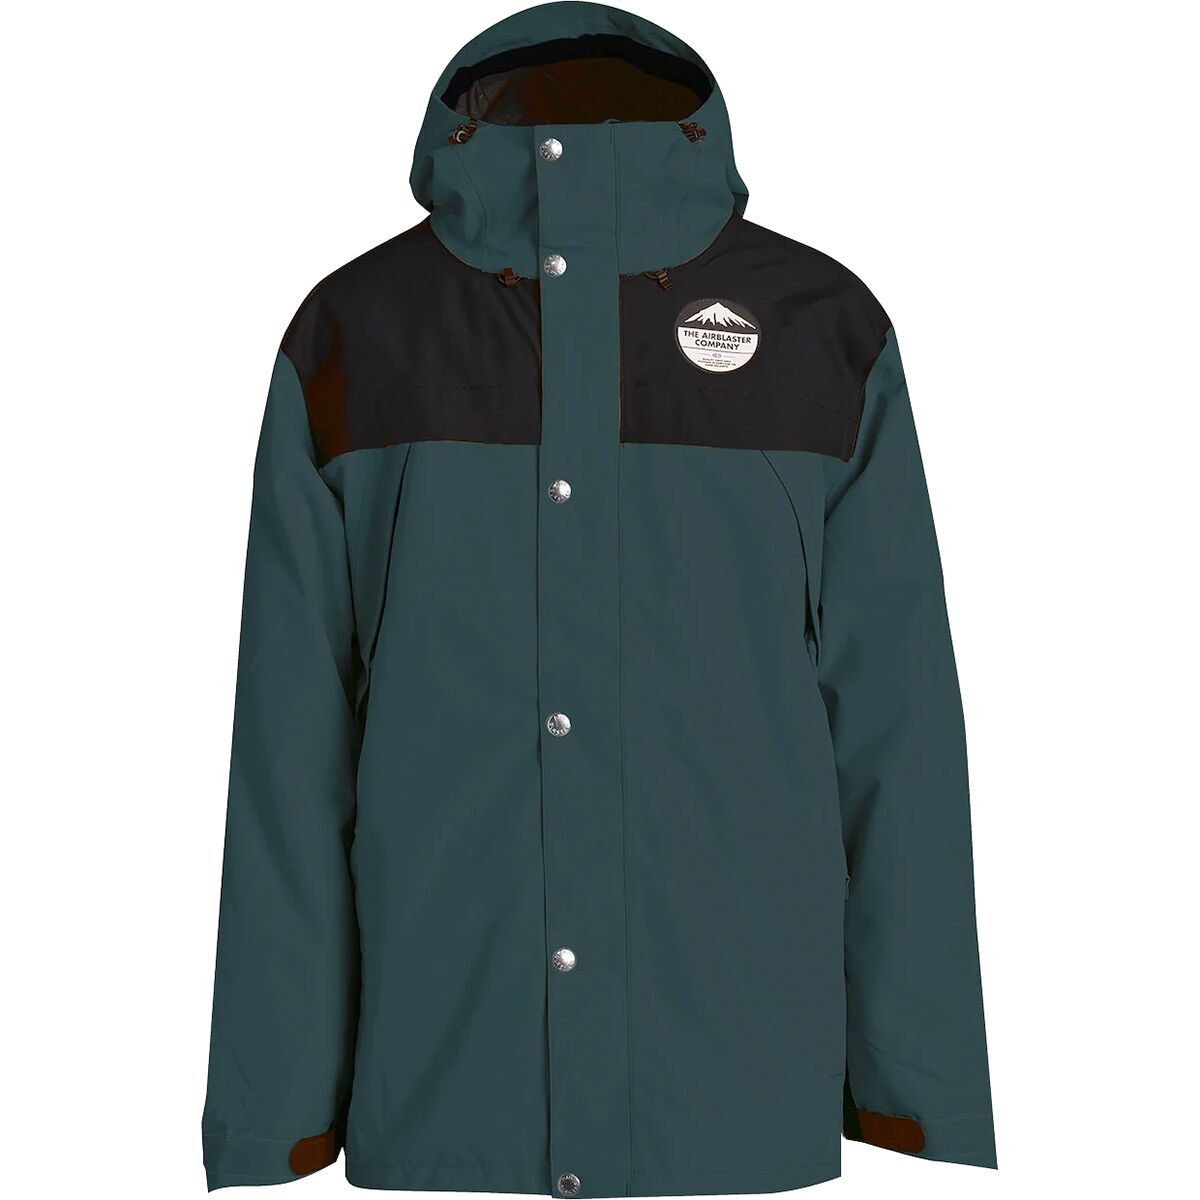 Airblaster Guide Shell - Men's Spruce